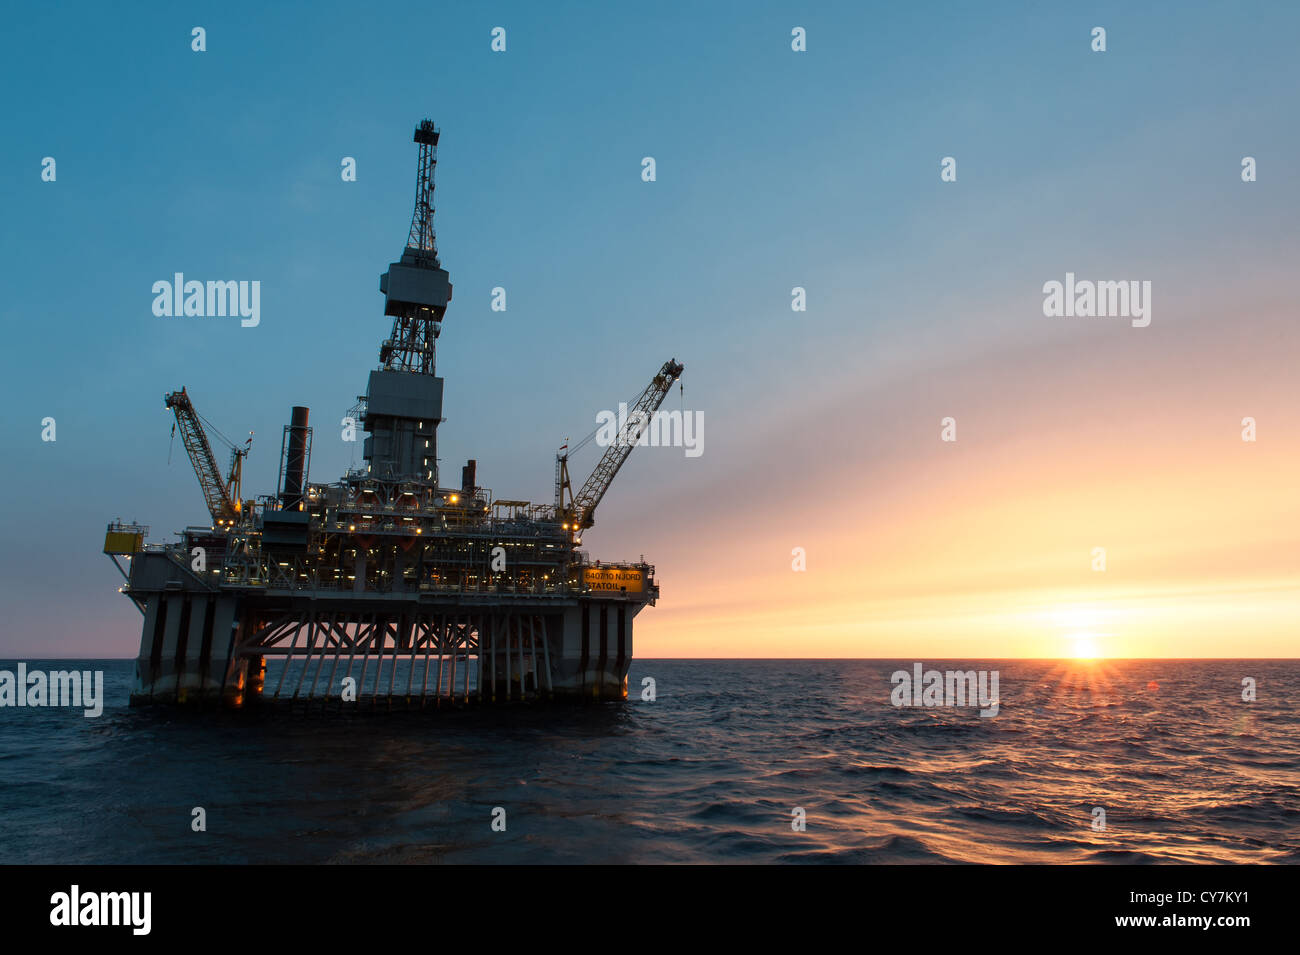 Oil rig at sun set in the North Sea Stock Photo